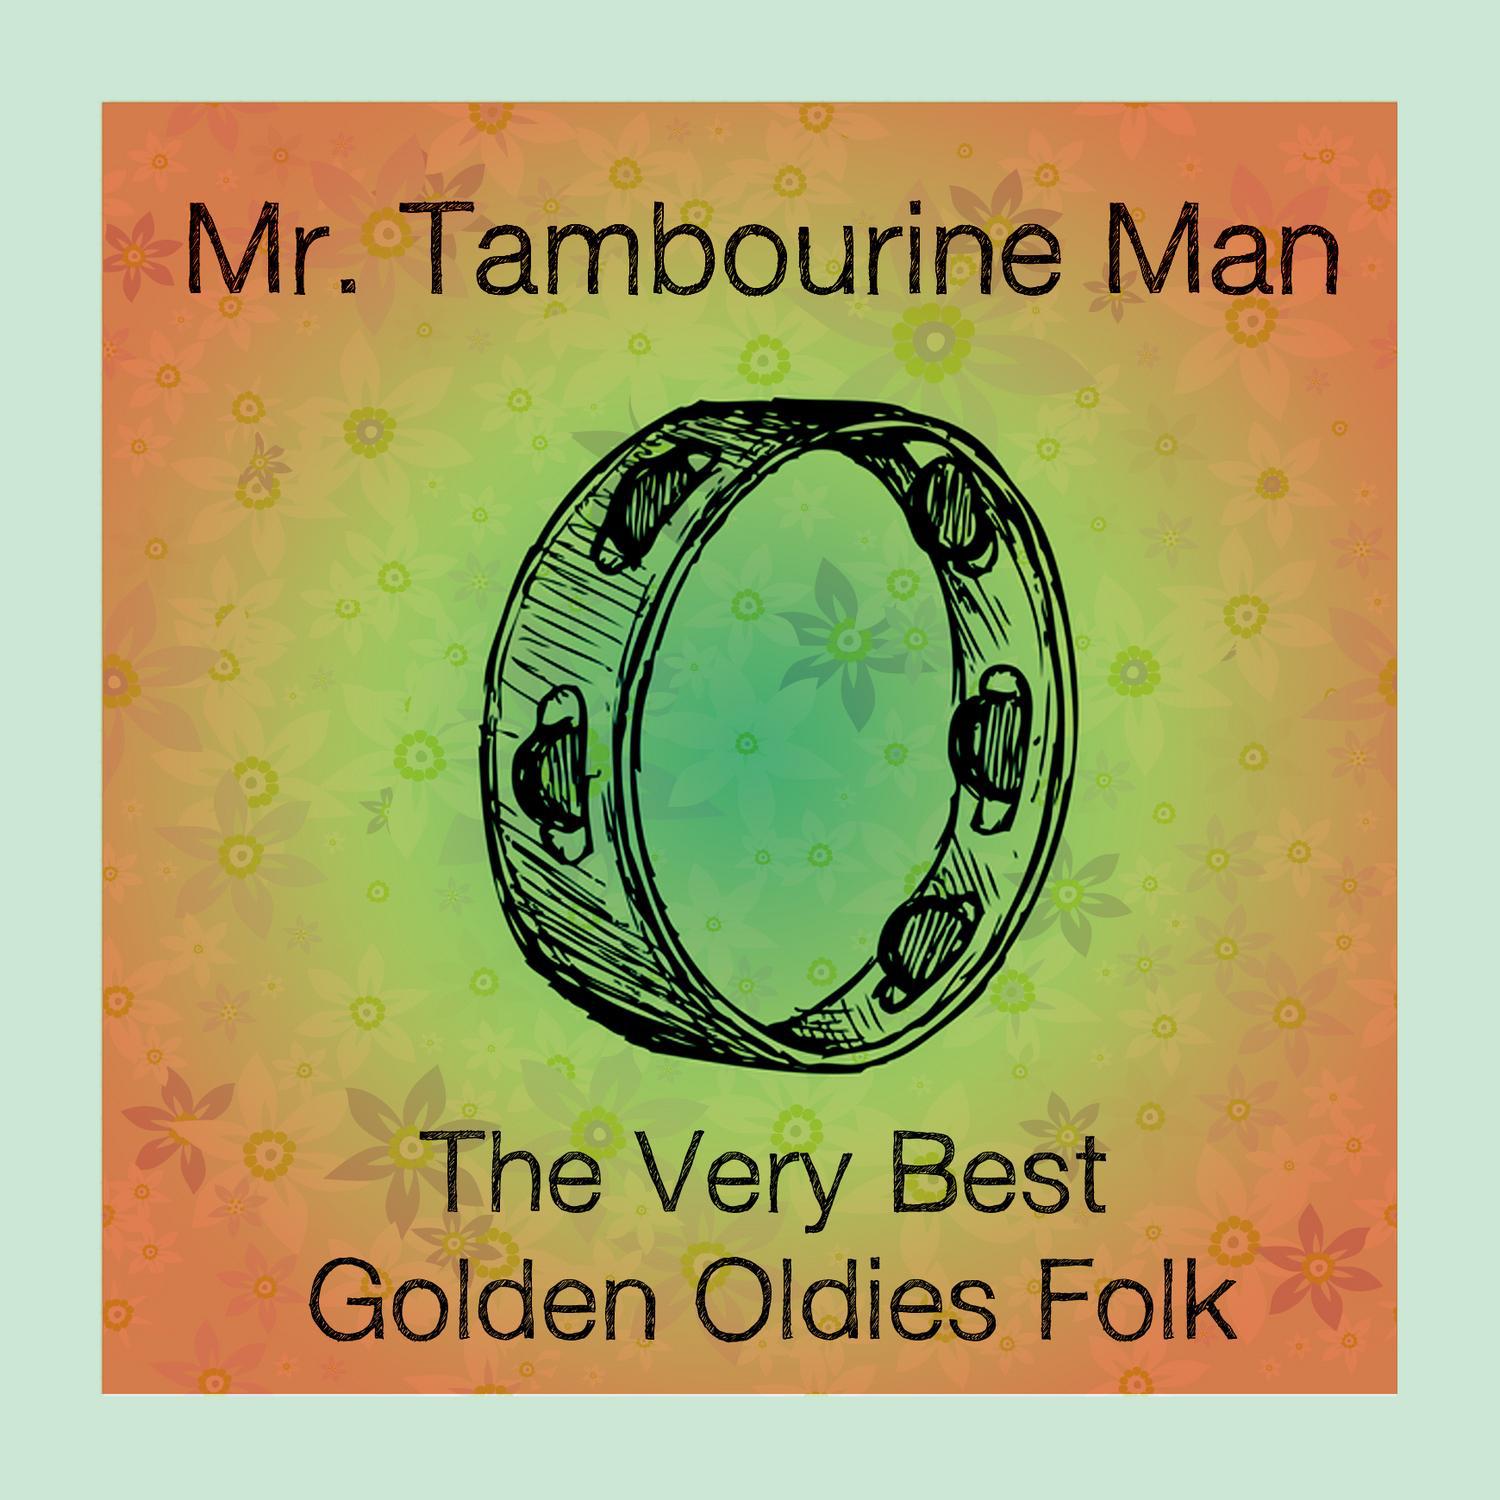 Mr. Tambourine Man: The Very Best Golden Oldies Folk and Classic Rock and Roll of The '60s with the Byrds, Bob Dylan, Judy Collins, Donovan, Cat Stevens, And More